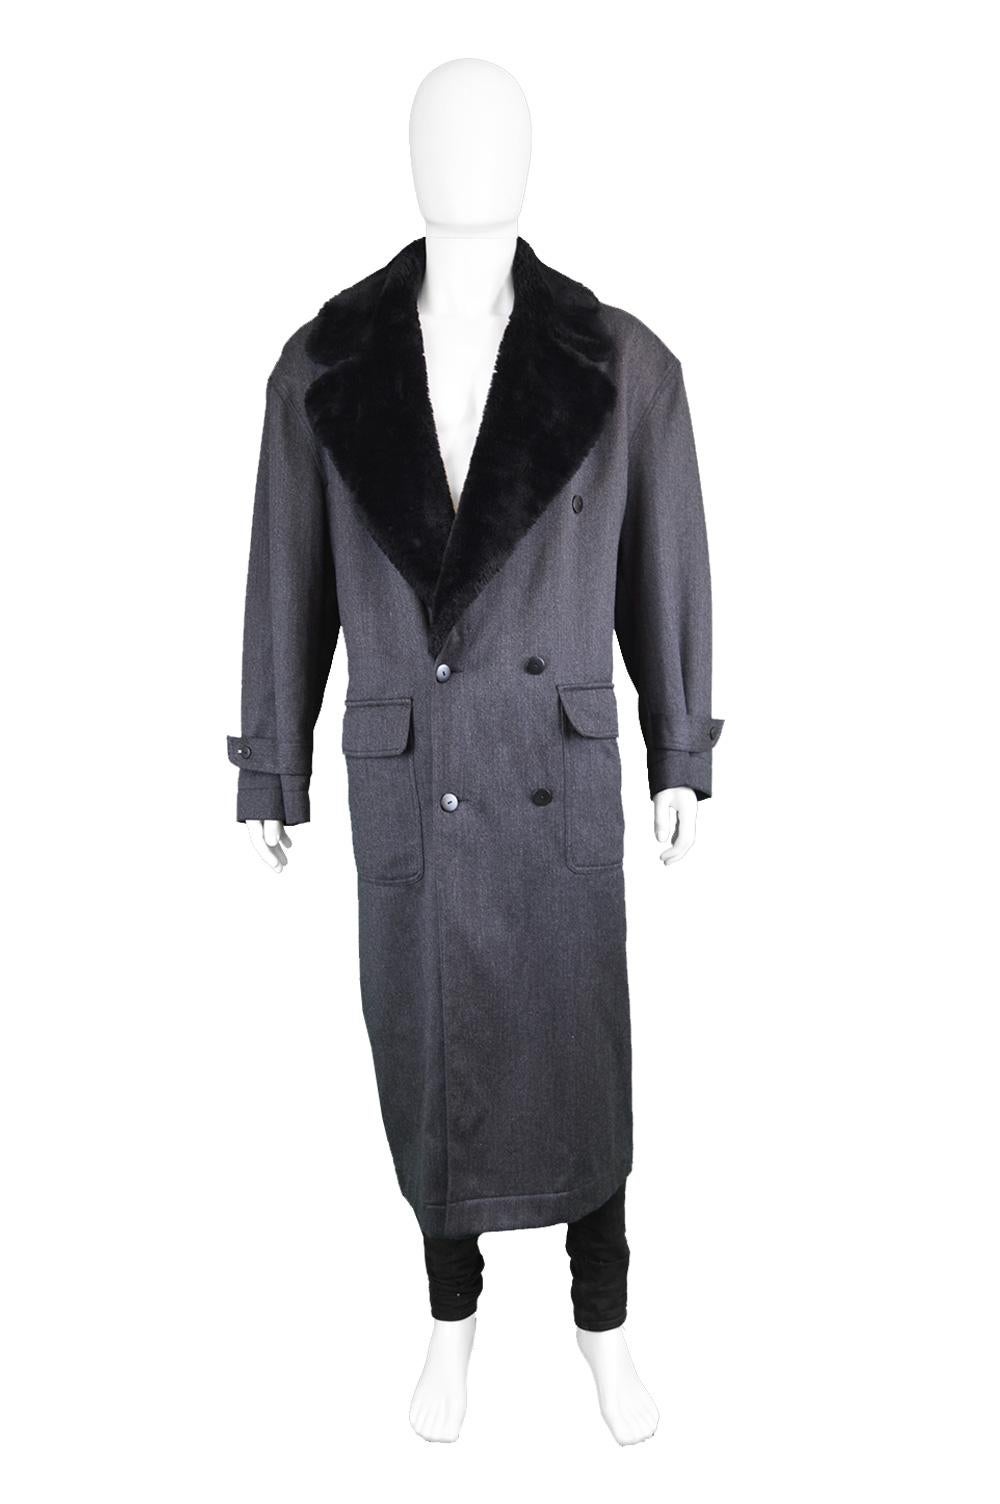 Byblos Men's Vintage Fine Grey Wool Over Coat Jacket with Black Faux Fur Collar, 1990s 

Size: Marked 50 which is roughly a men’s M-L but this gives an oversized fit and would better suit a Men’s XL to XXL which still gives a loose fit that is meant